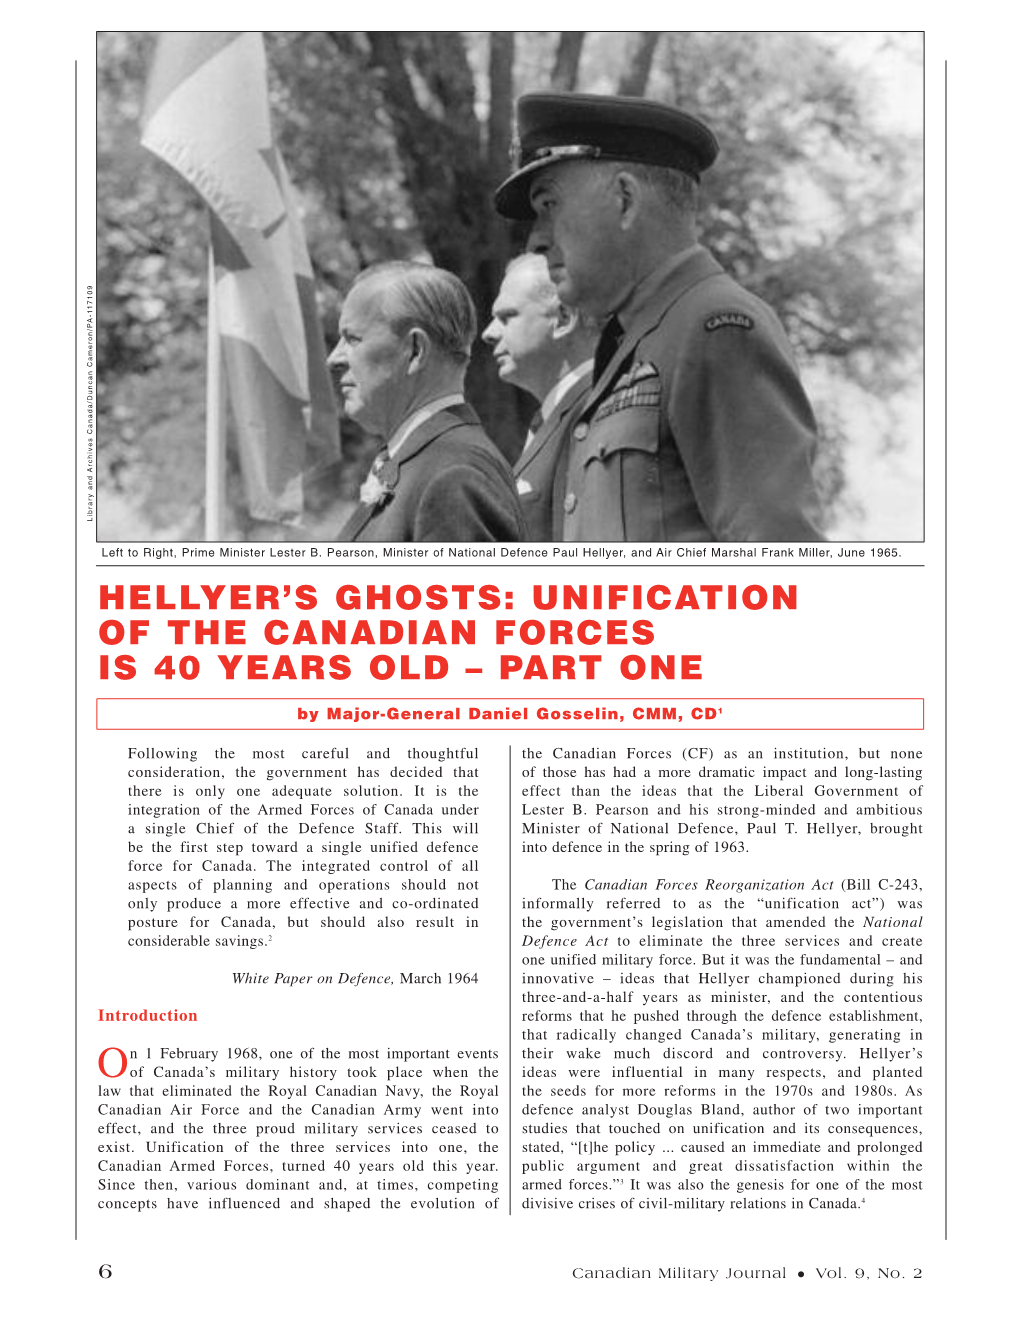 Unification of the Canadian Forces Is 40 Years